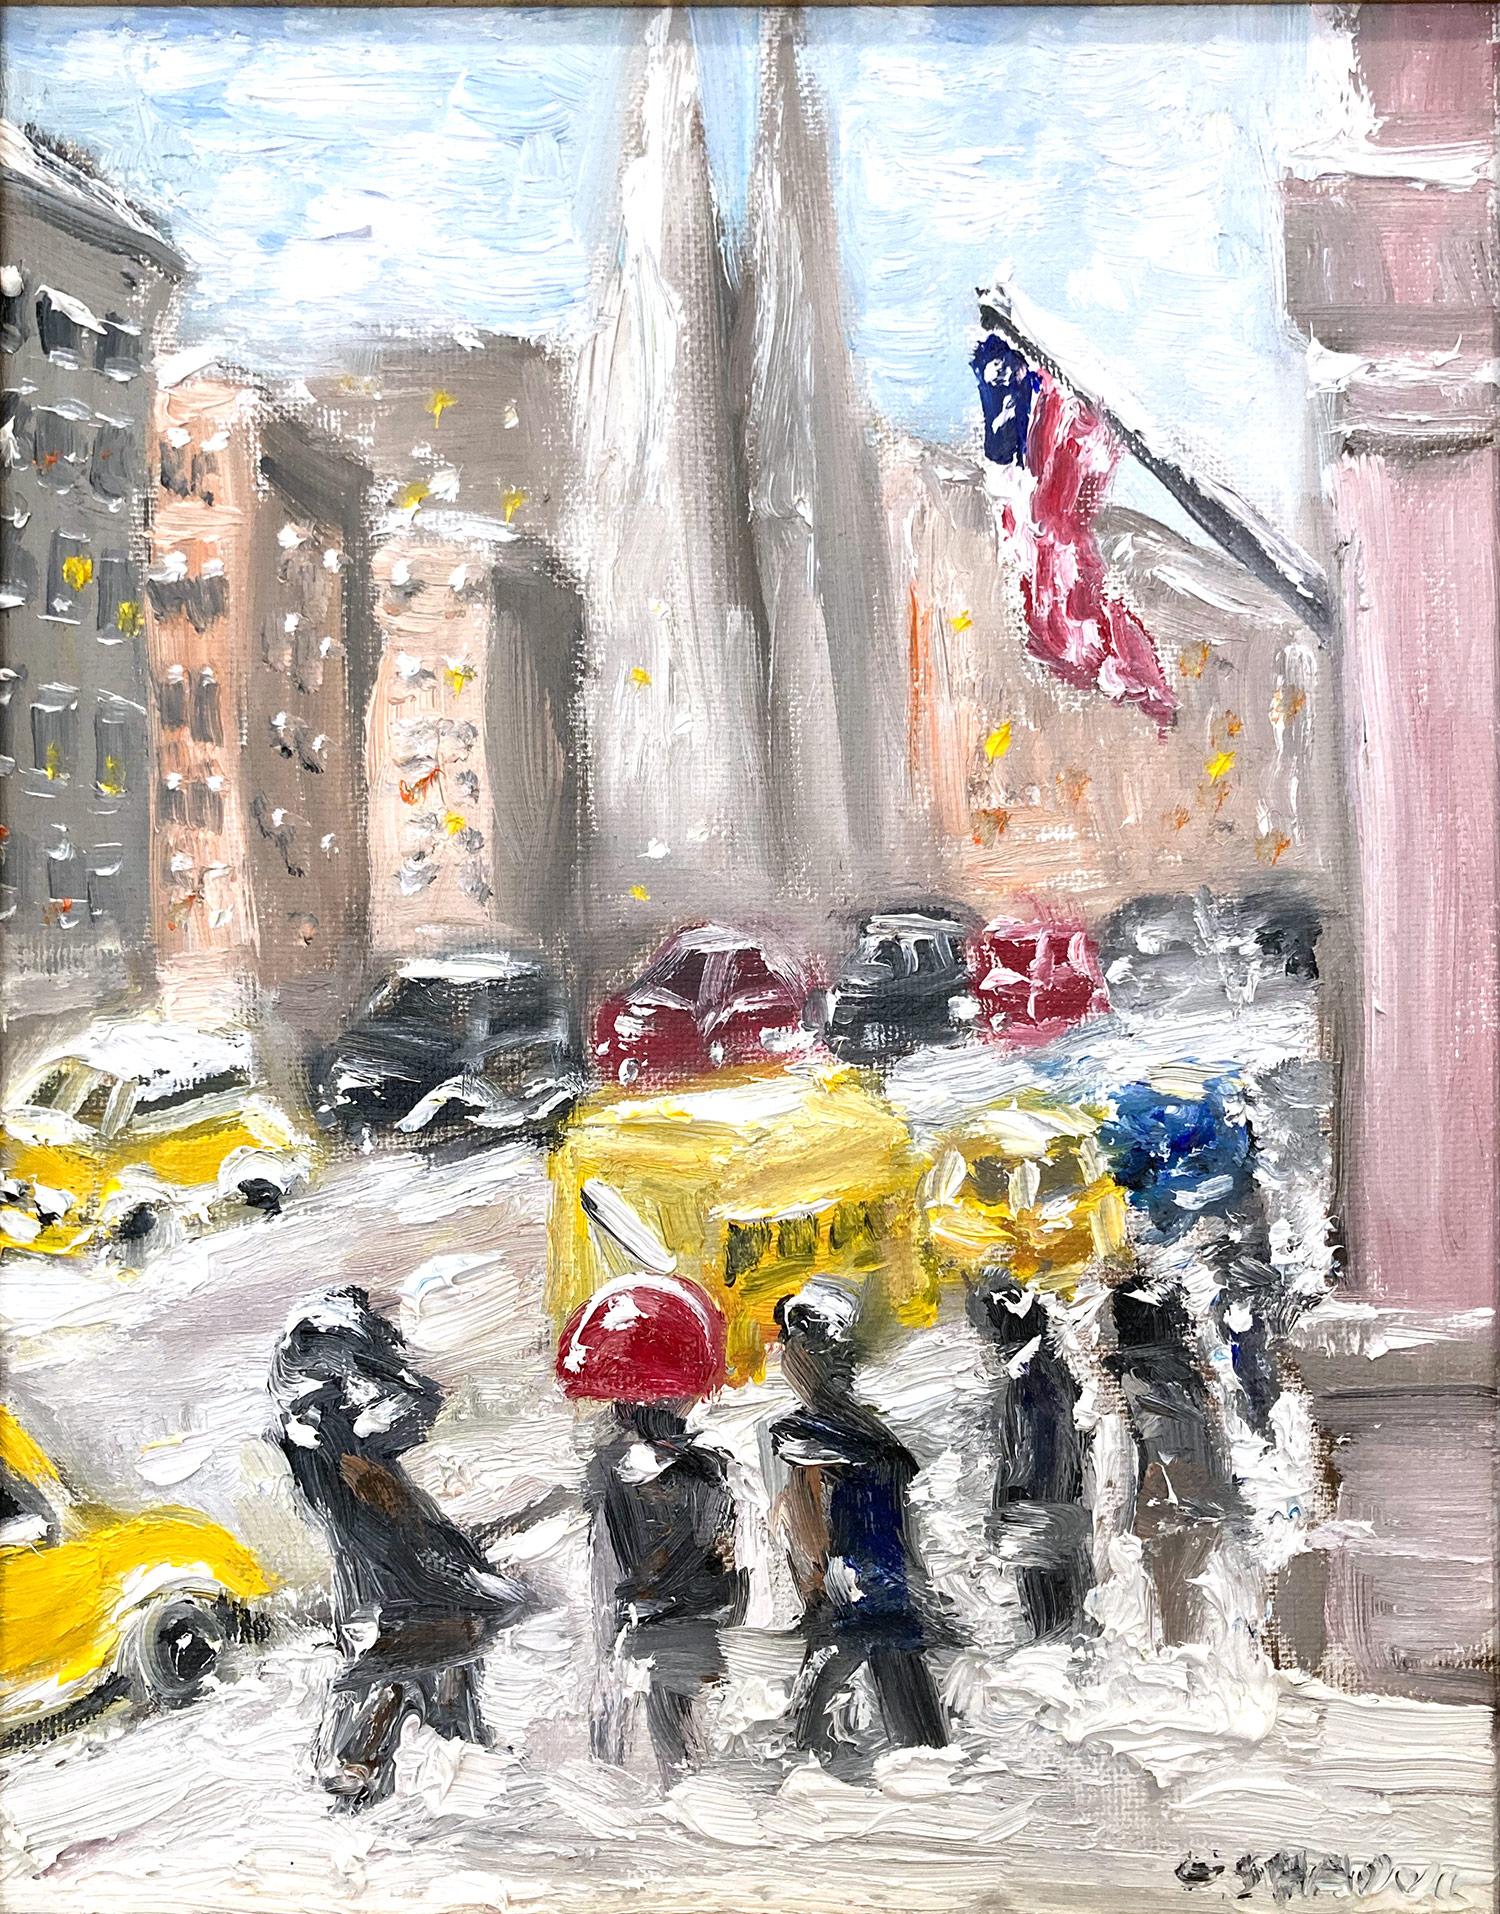 A charming depiction of Snow on 5th Avenue New York City with figures walking and cars in the distance. A cozy impressionistic street scene with colors of cobalts, light pink, whites, and burnt sienna's. An iconic street scene with beautiful